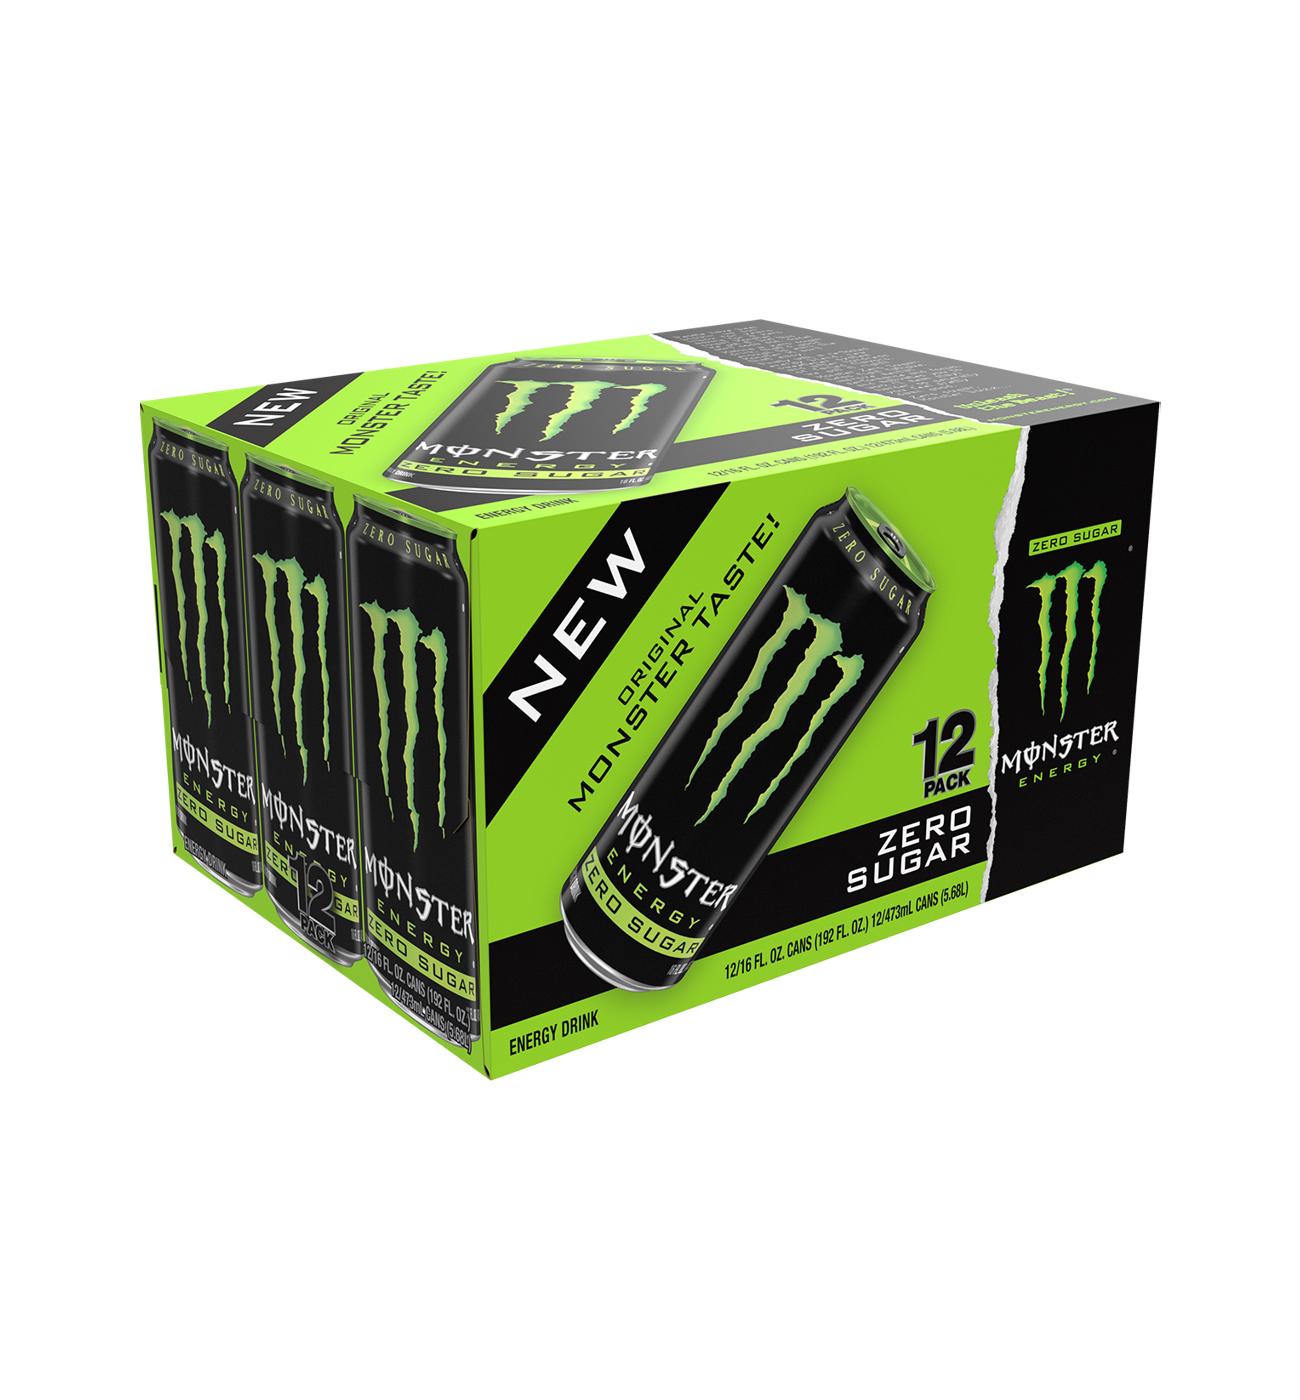 Monster Energy Zero Sugar 12 pk Cans; image 2 of 2